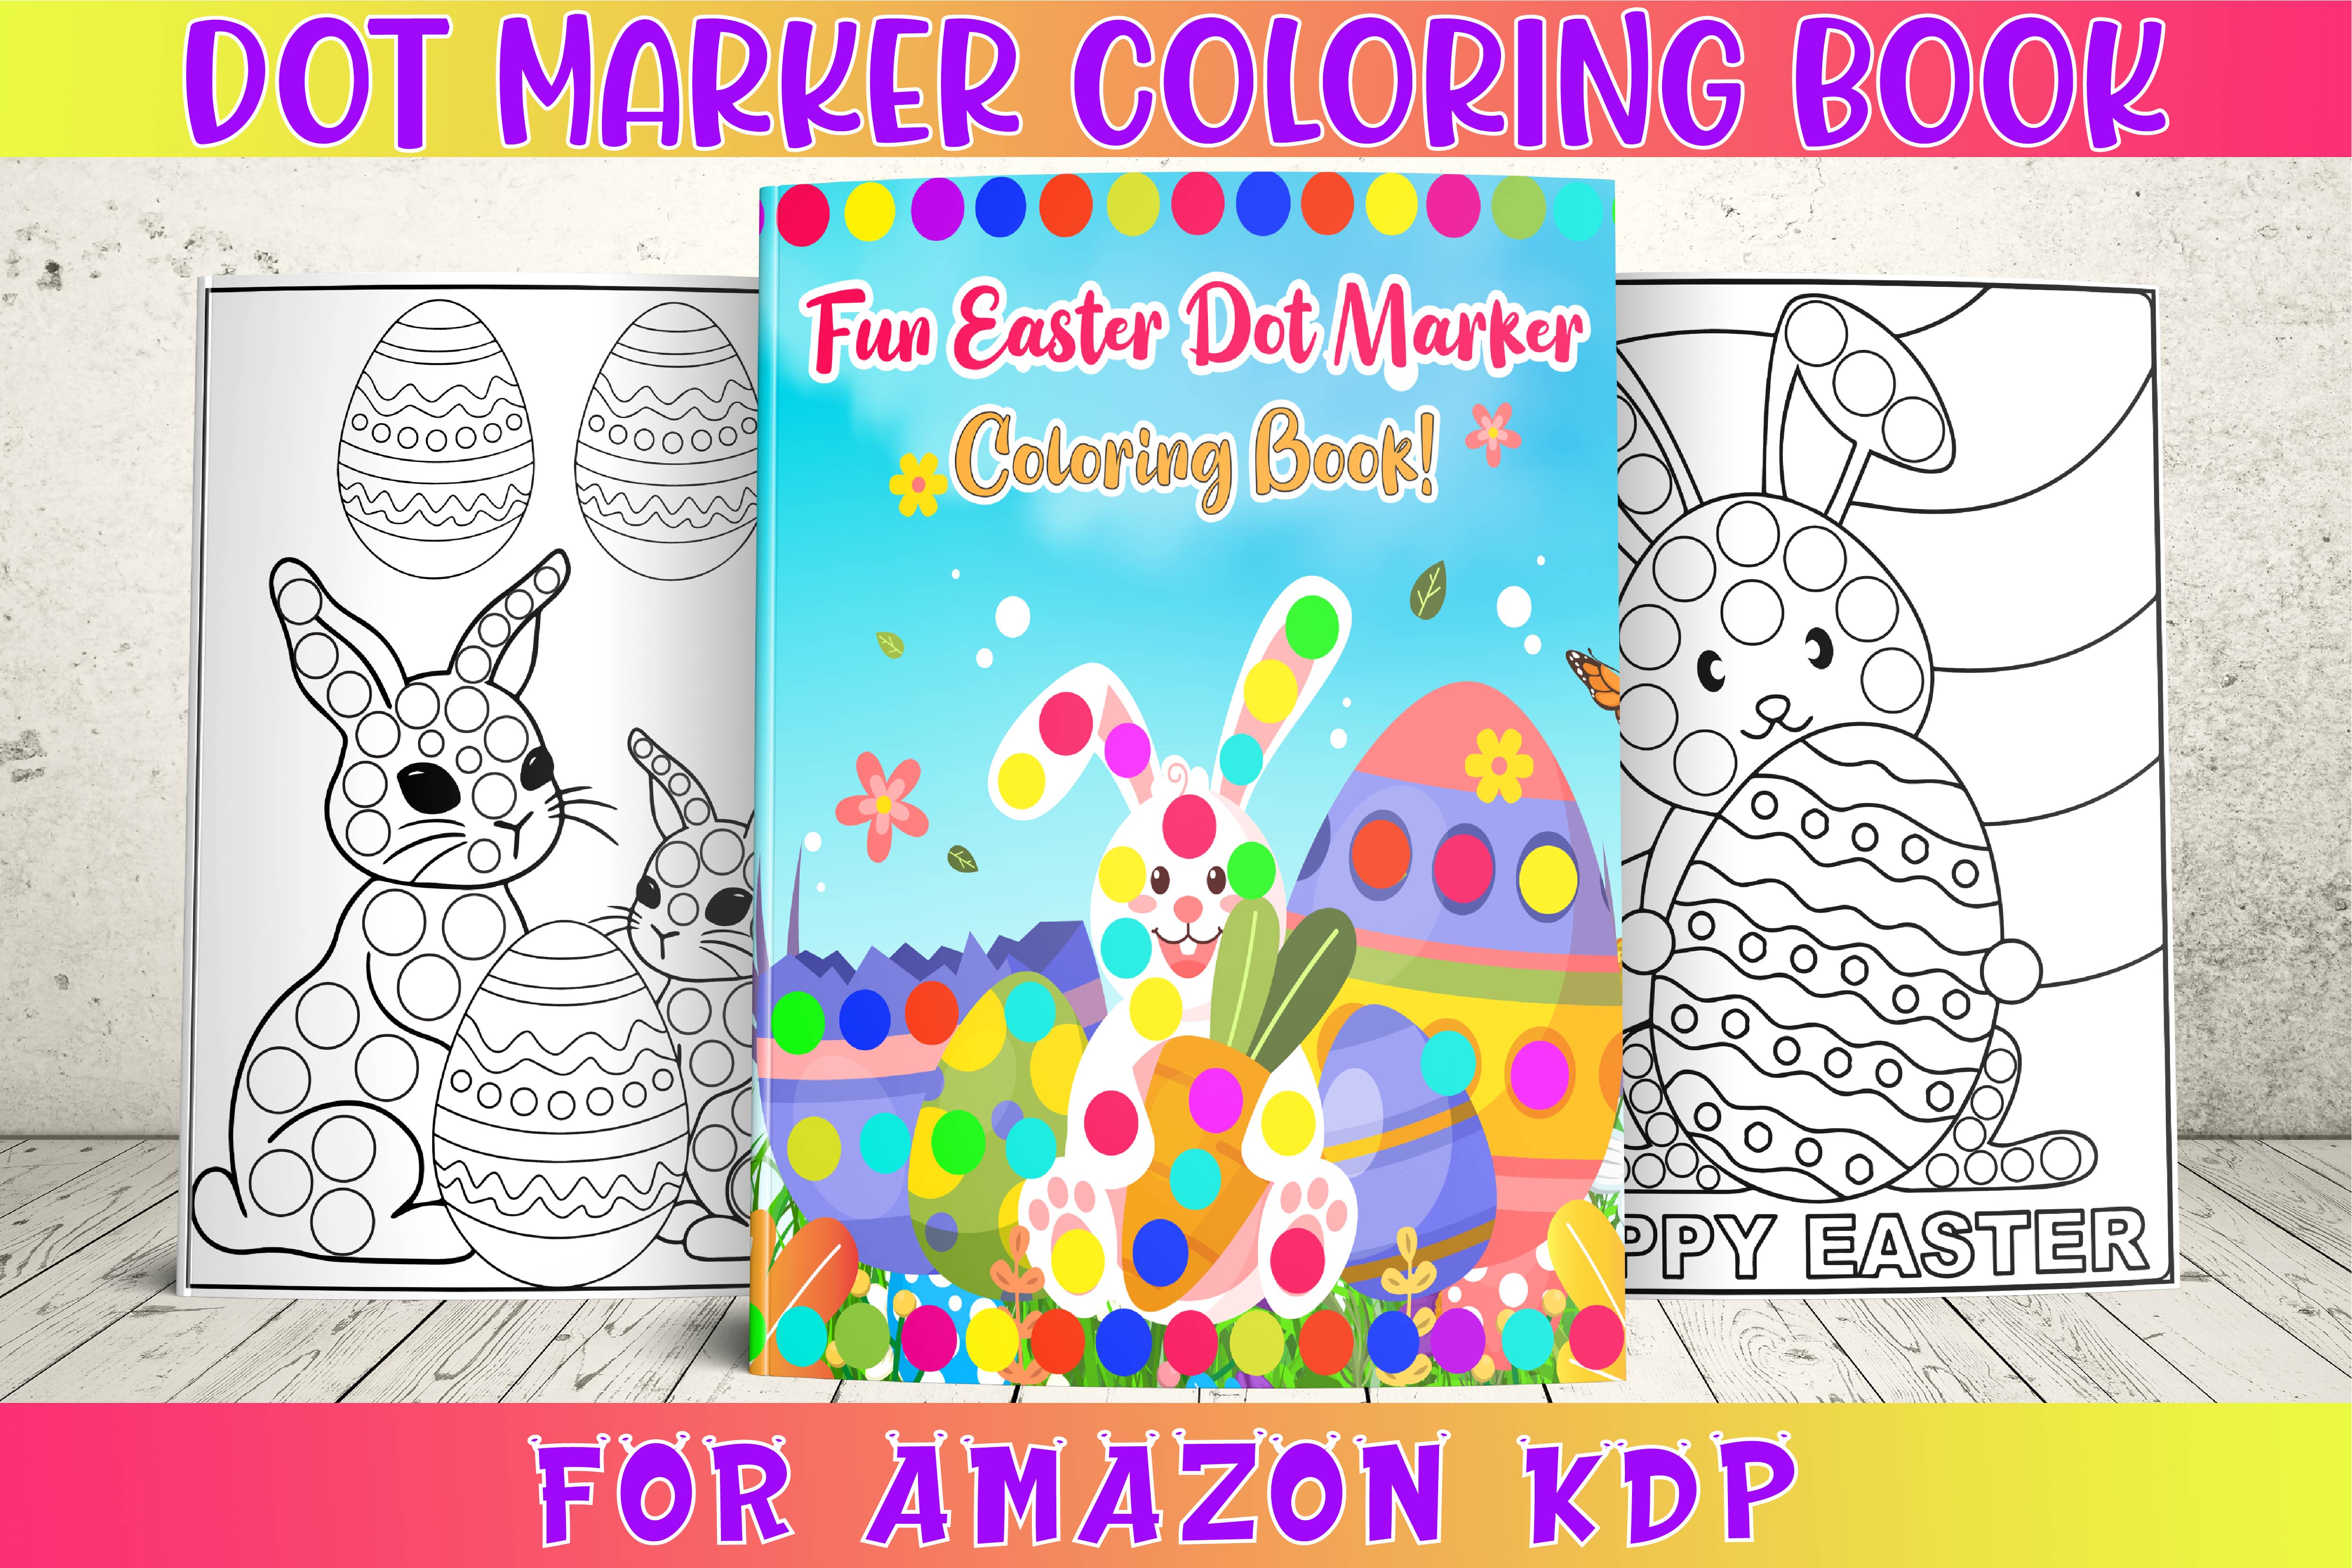 Design dot marker, scissor skills coloring book cover and pages